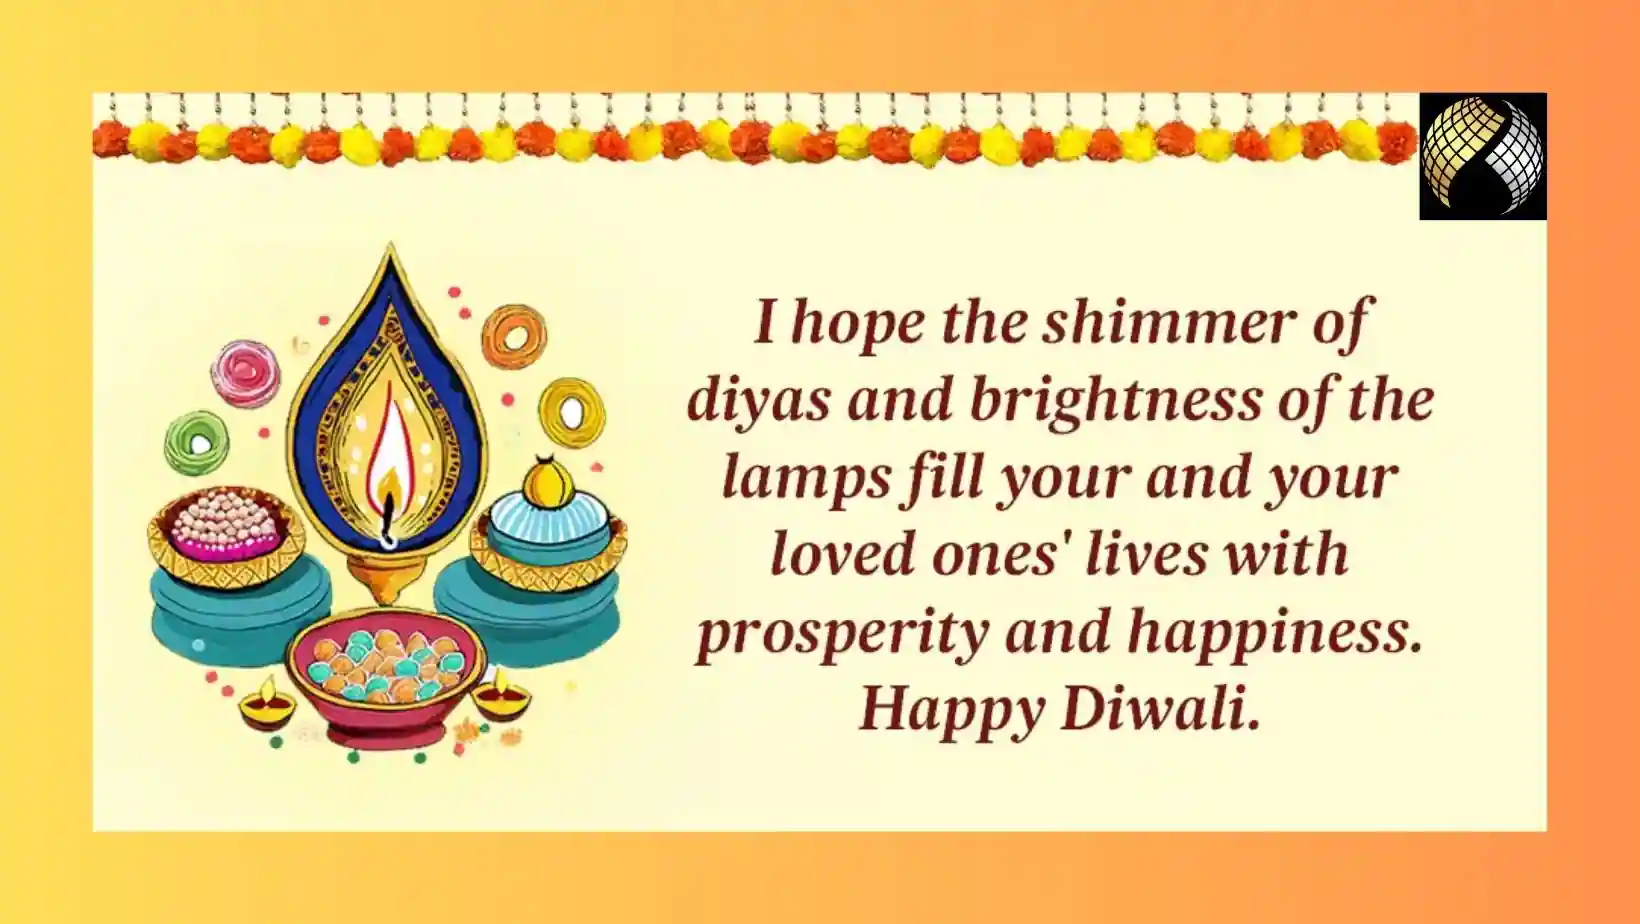 Happy Diwali 2023-I wish you and your loved ones a very prosperous Happy Diwali.